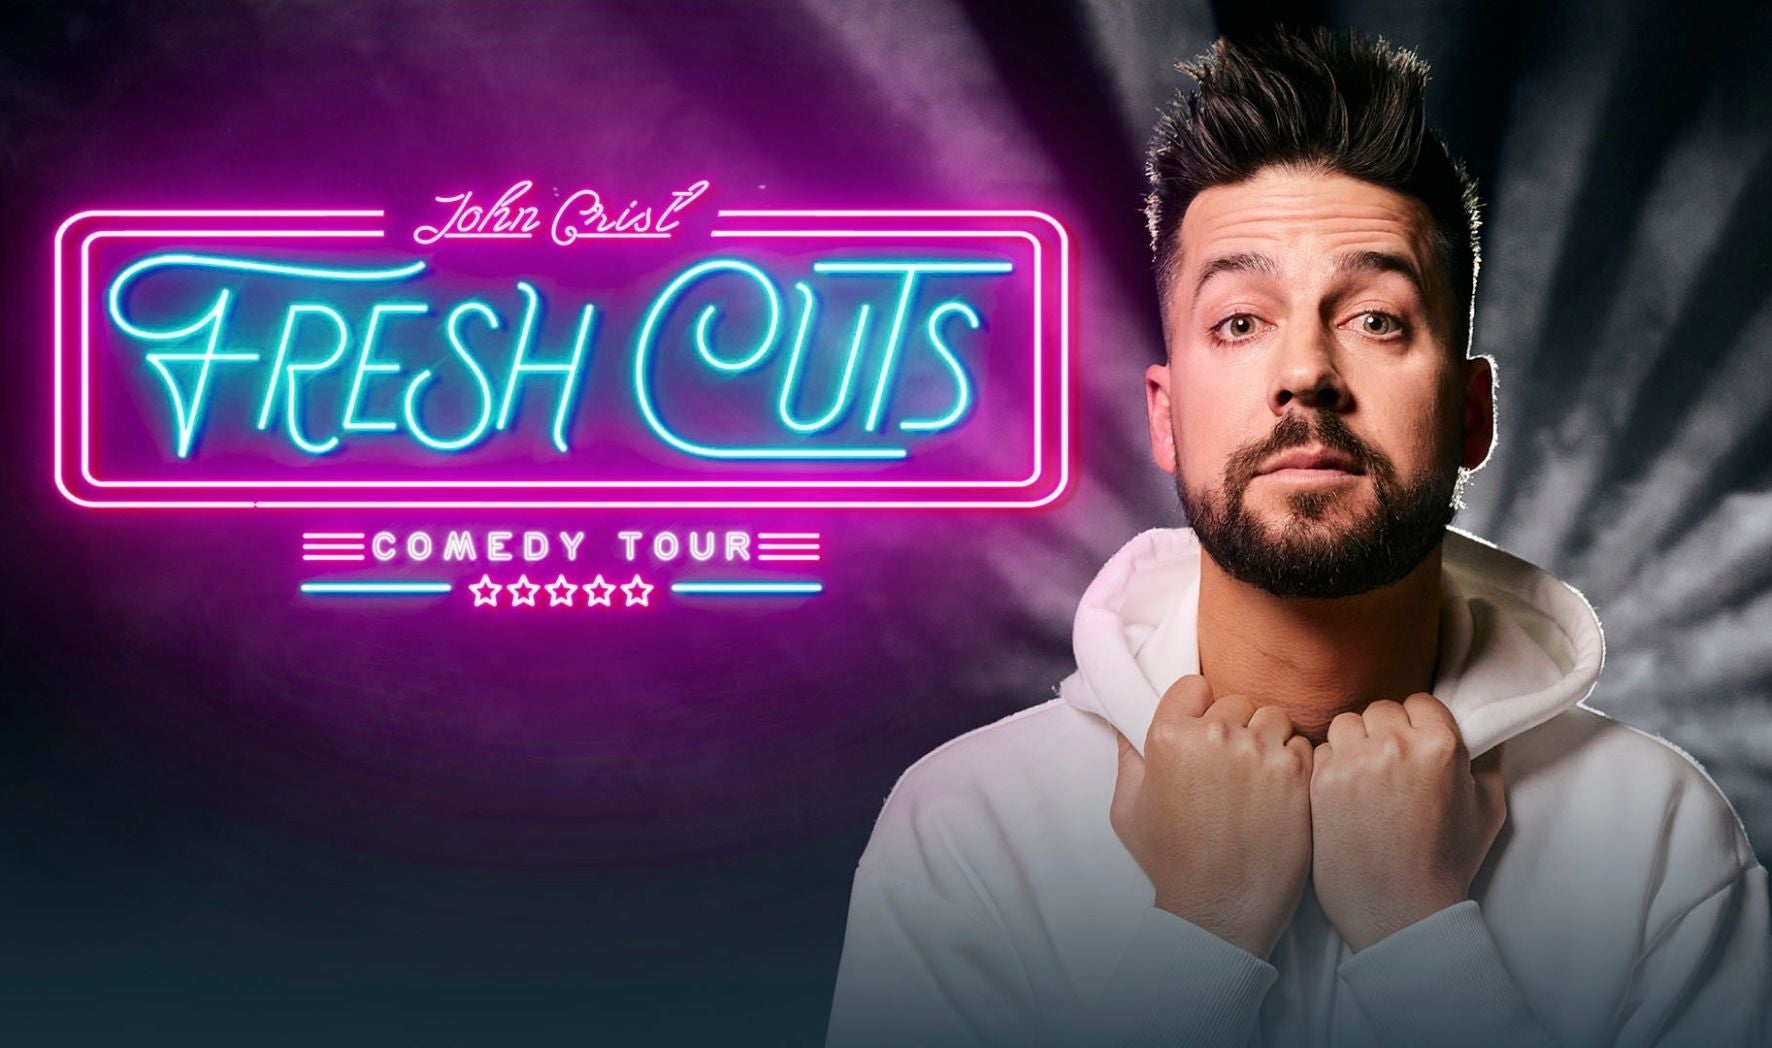 More Info for John Crist: The Fresh Cuts Comedy Tour